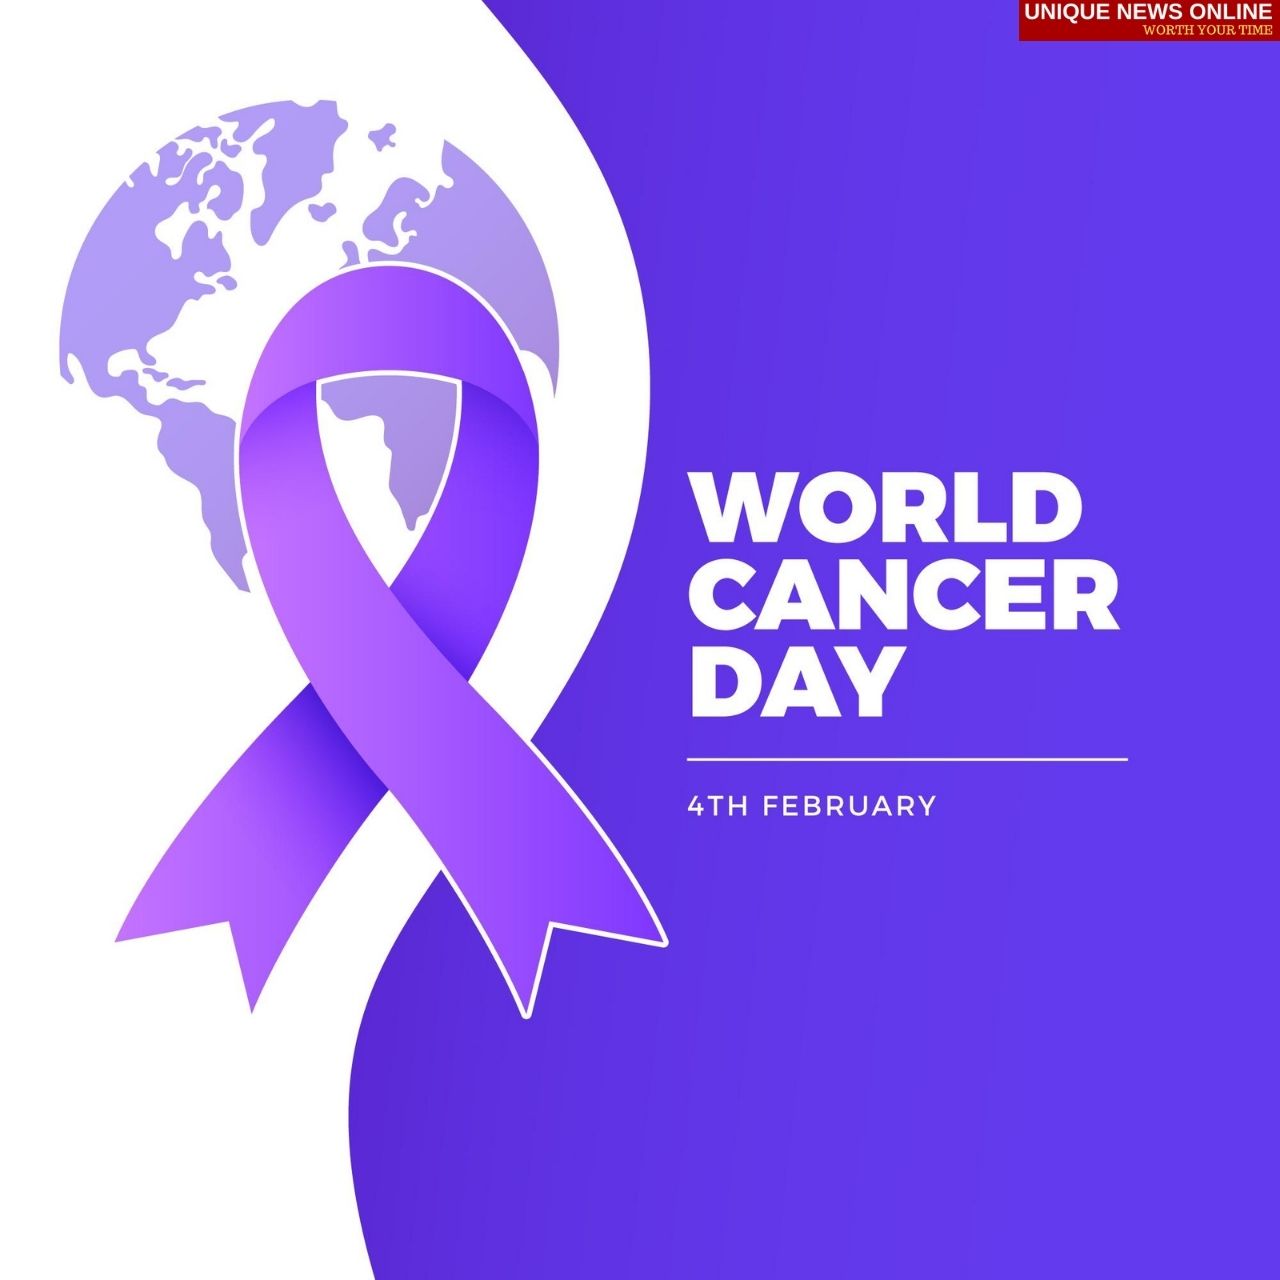 World Cancer Day 2022 Quotes, Slogans, Messages, Posters, HD Images, Wishes to Create Awareness